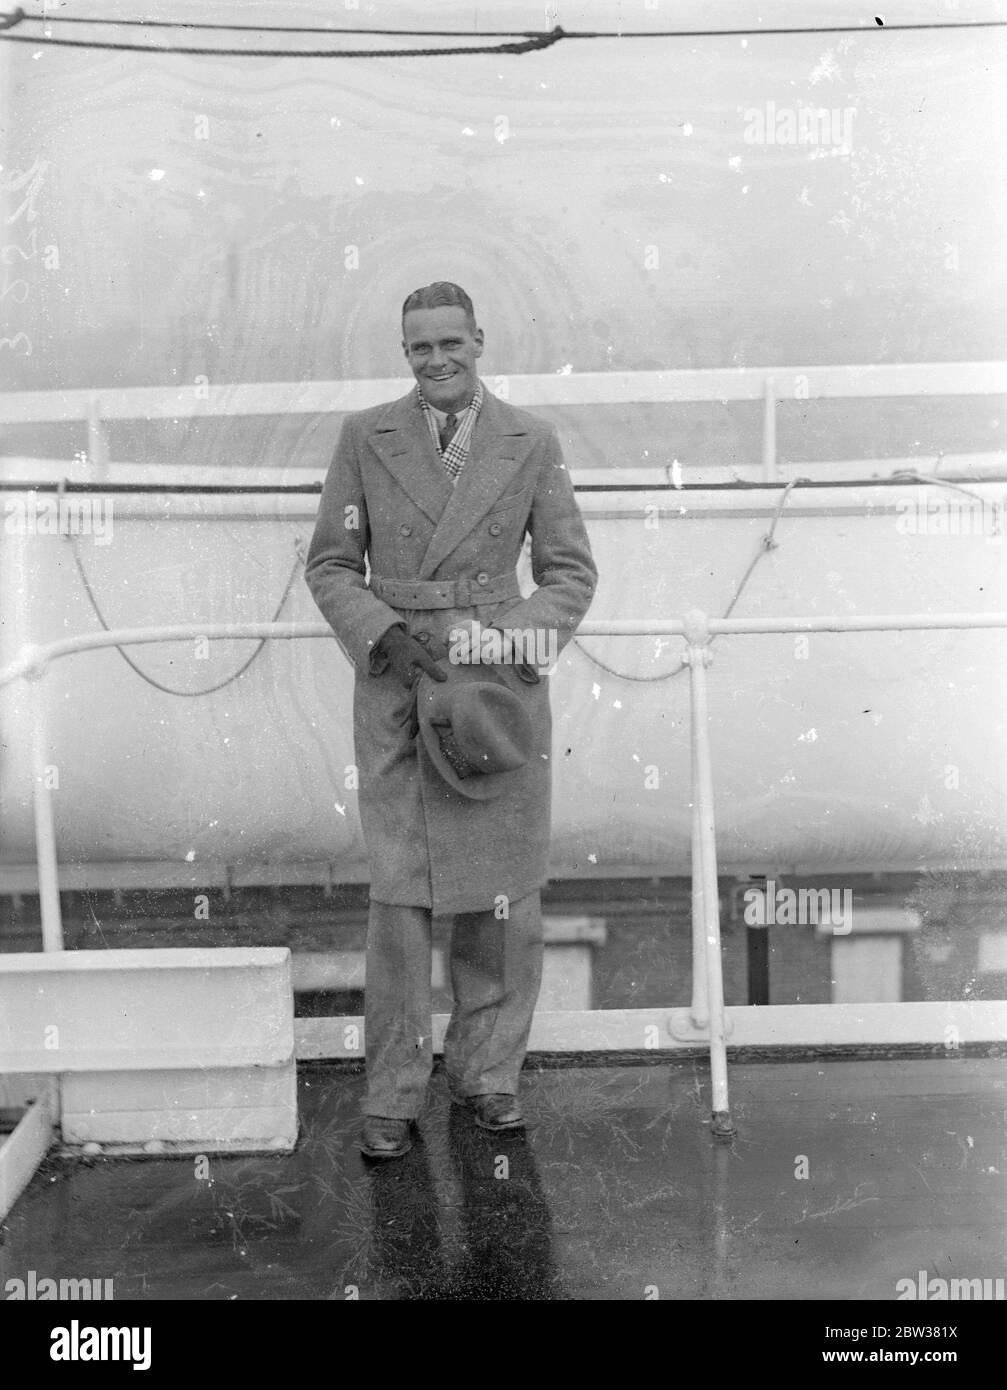 Huddersfield Town ' s , South African centre forward arrives . L S Brown , the Transvaal centre forward who has been signed on by Huddersfield Town FC , arrived at Southampton aboard the ' Dunbar Castle ' from Cape town . Brown is 23 years of age and is six feet two inches in height . He was welcomed on arrival by Mr Raymer , a Huddersfield Town director . Photo shows ; L S Brown on arrival at Southampton . 30 December 1933 Stock Photo